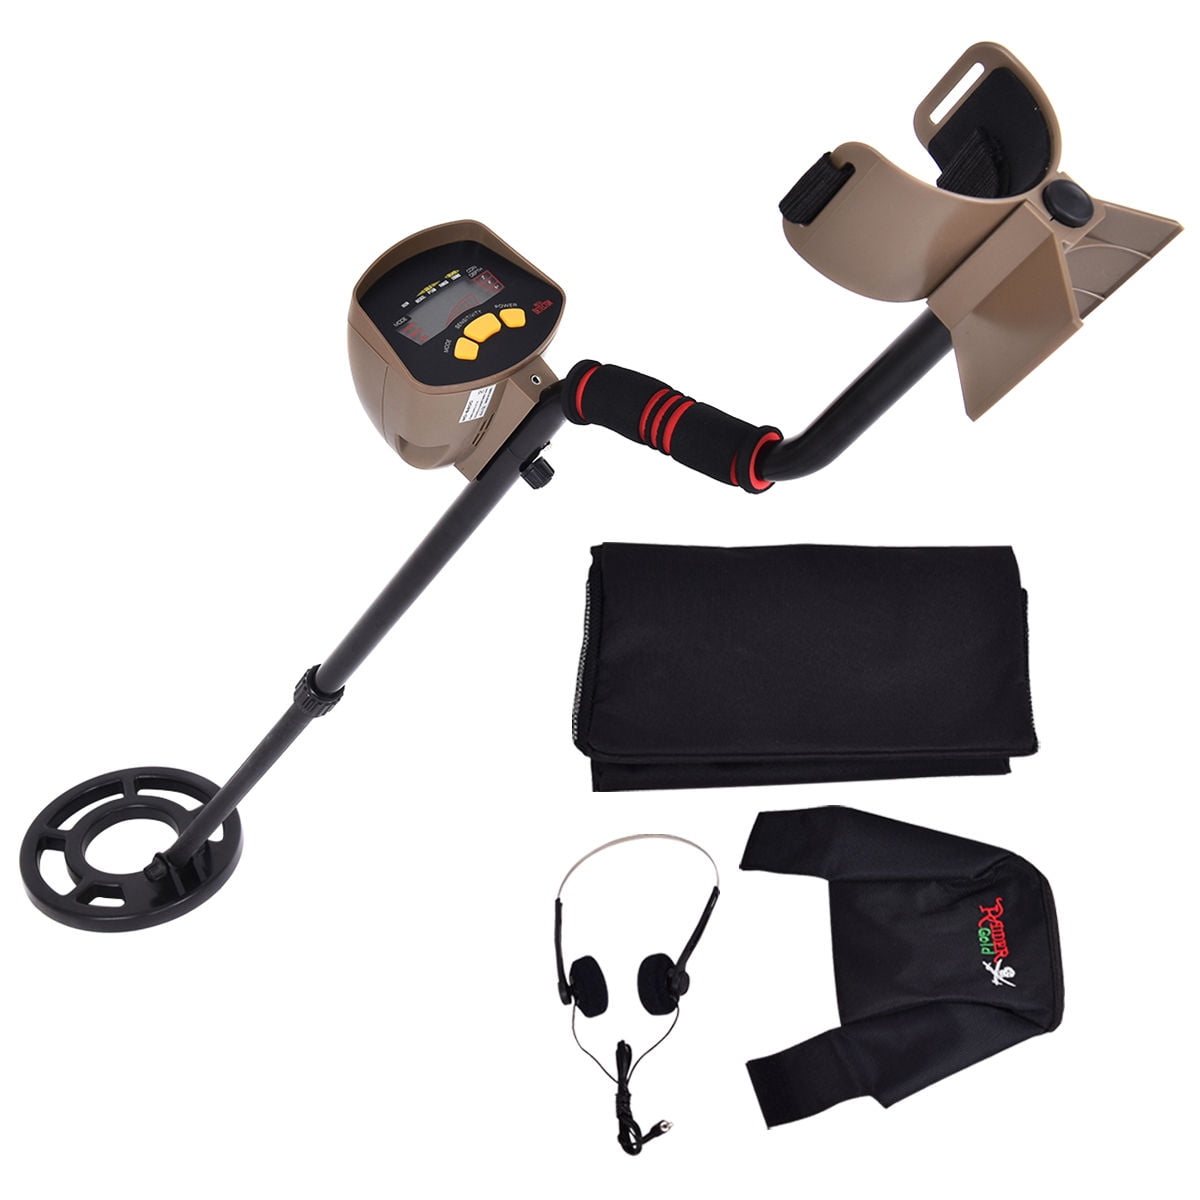 Costway TL35152 High Accuracy Metal Detector Kit for sale online